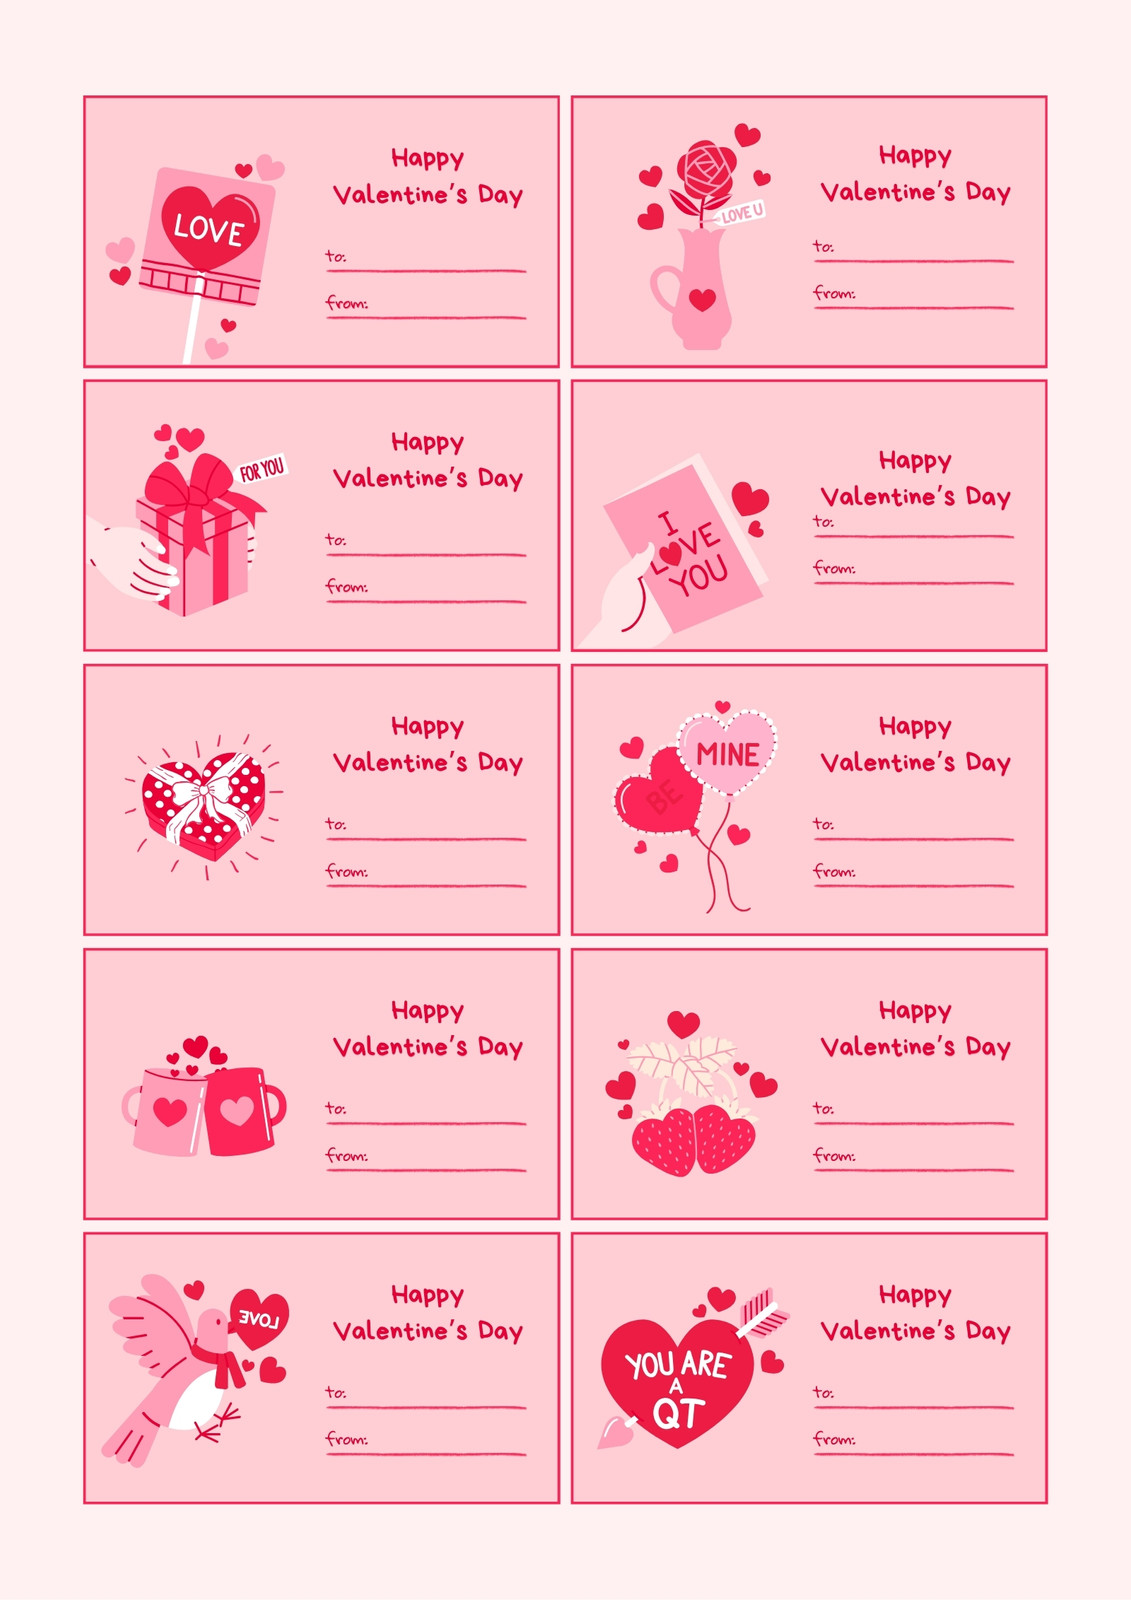 Uploaded with Pinterest Android app. Get it here: http://bit.ly/w38r4m |  Paper crafts cards, Chemistry gifts, Valentine crafts